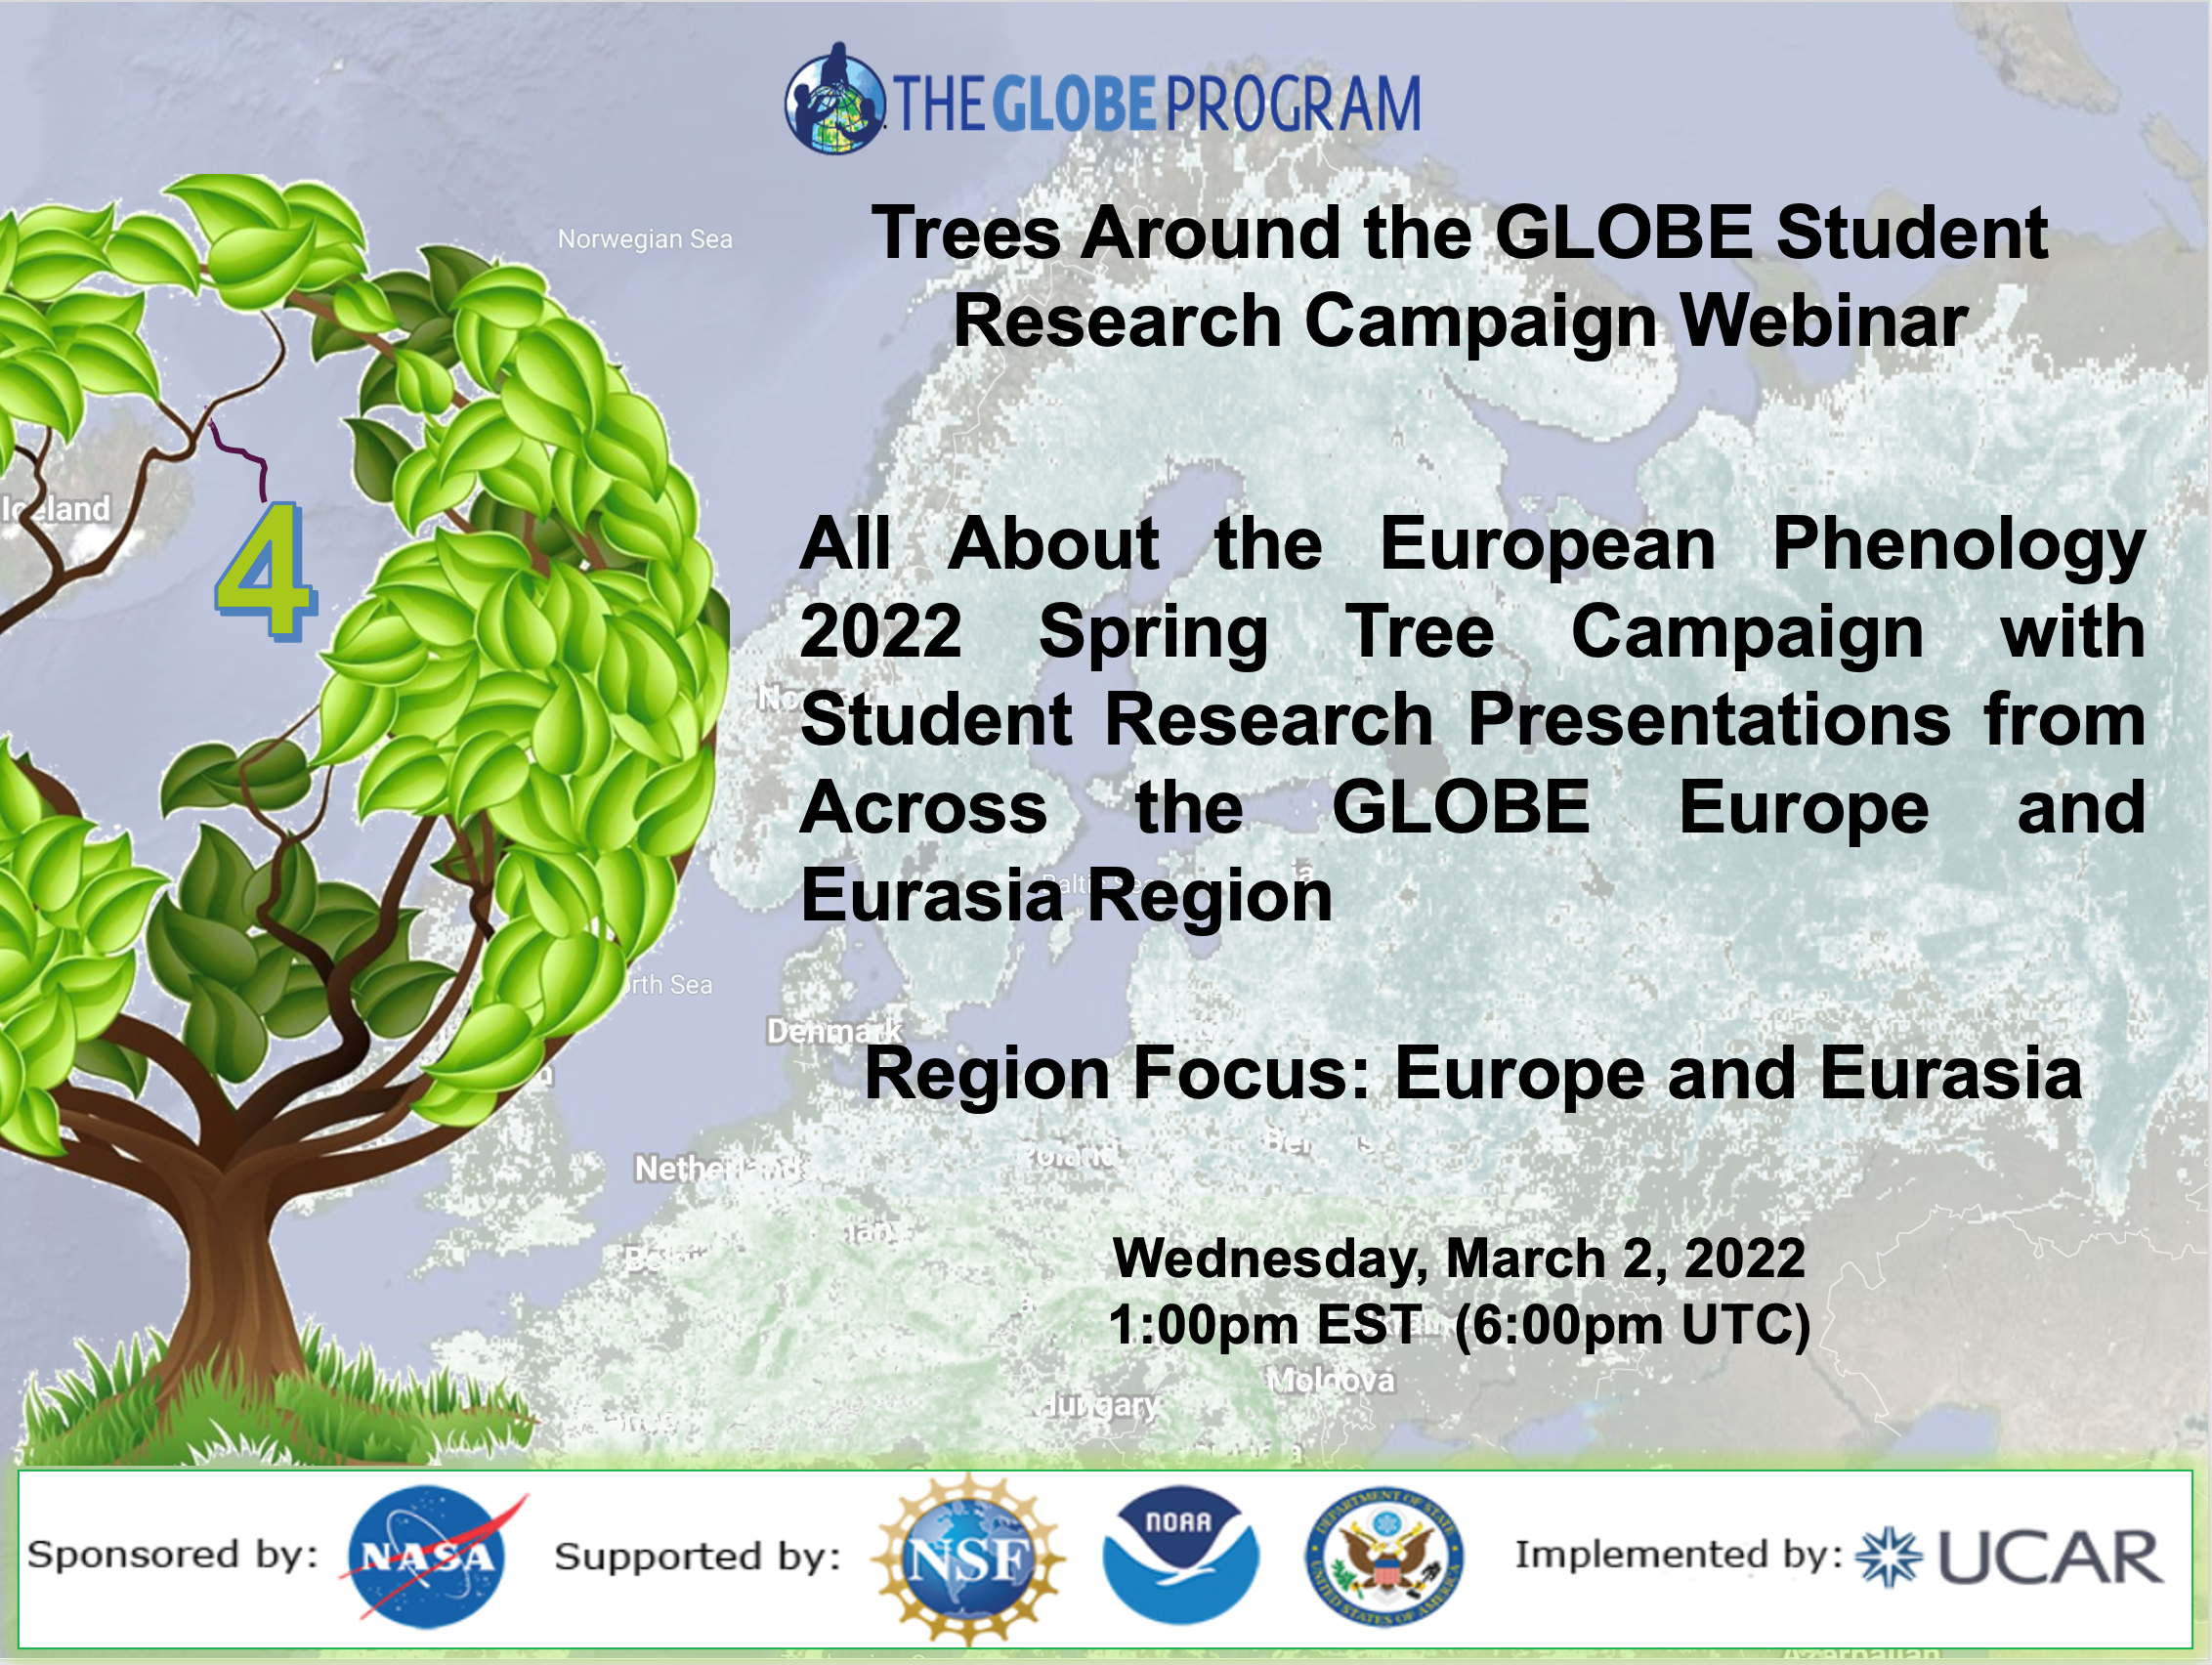 The Trees Around the GLOBE 02 March webinar shareable, showing the title of the event